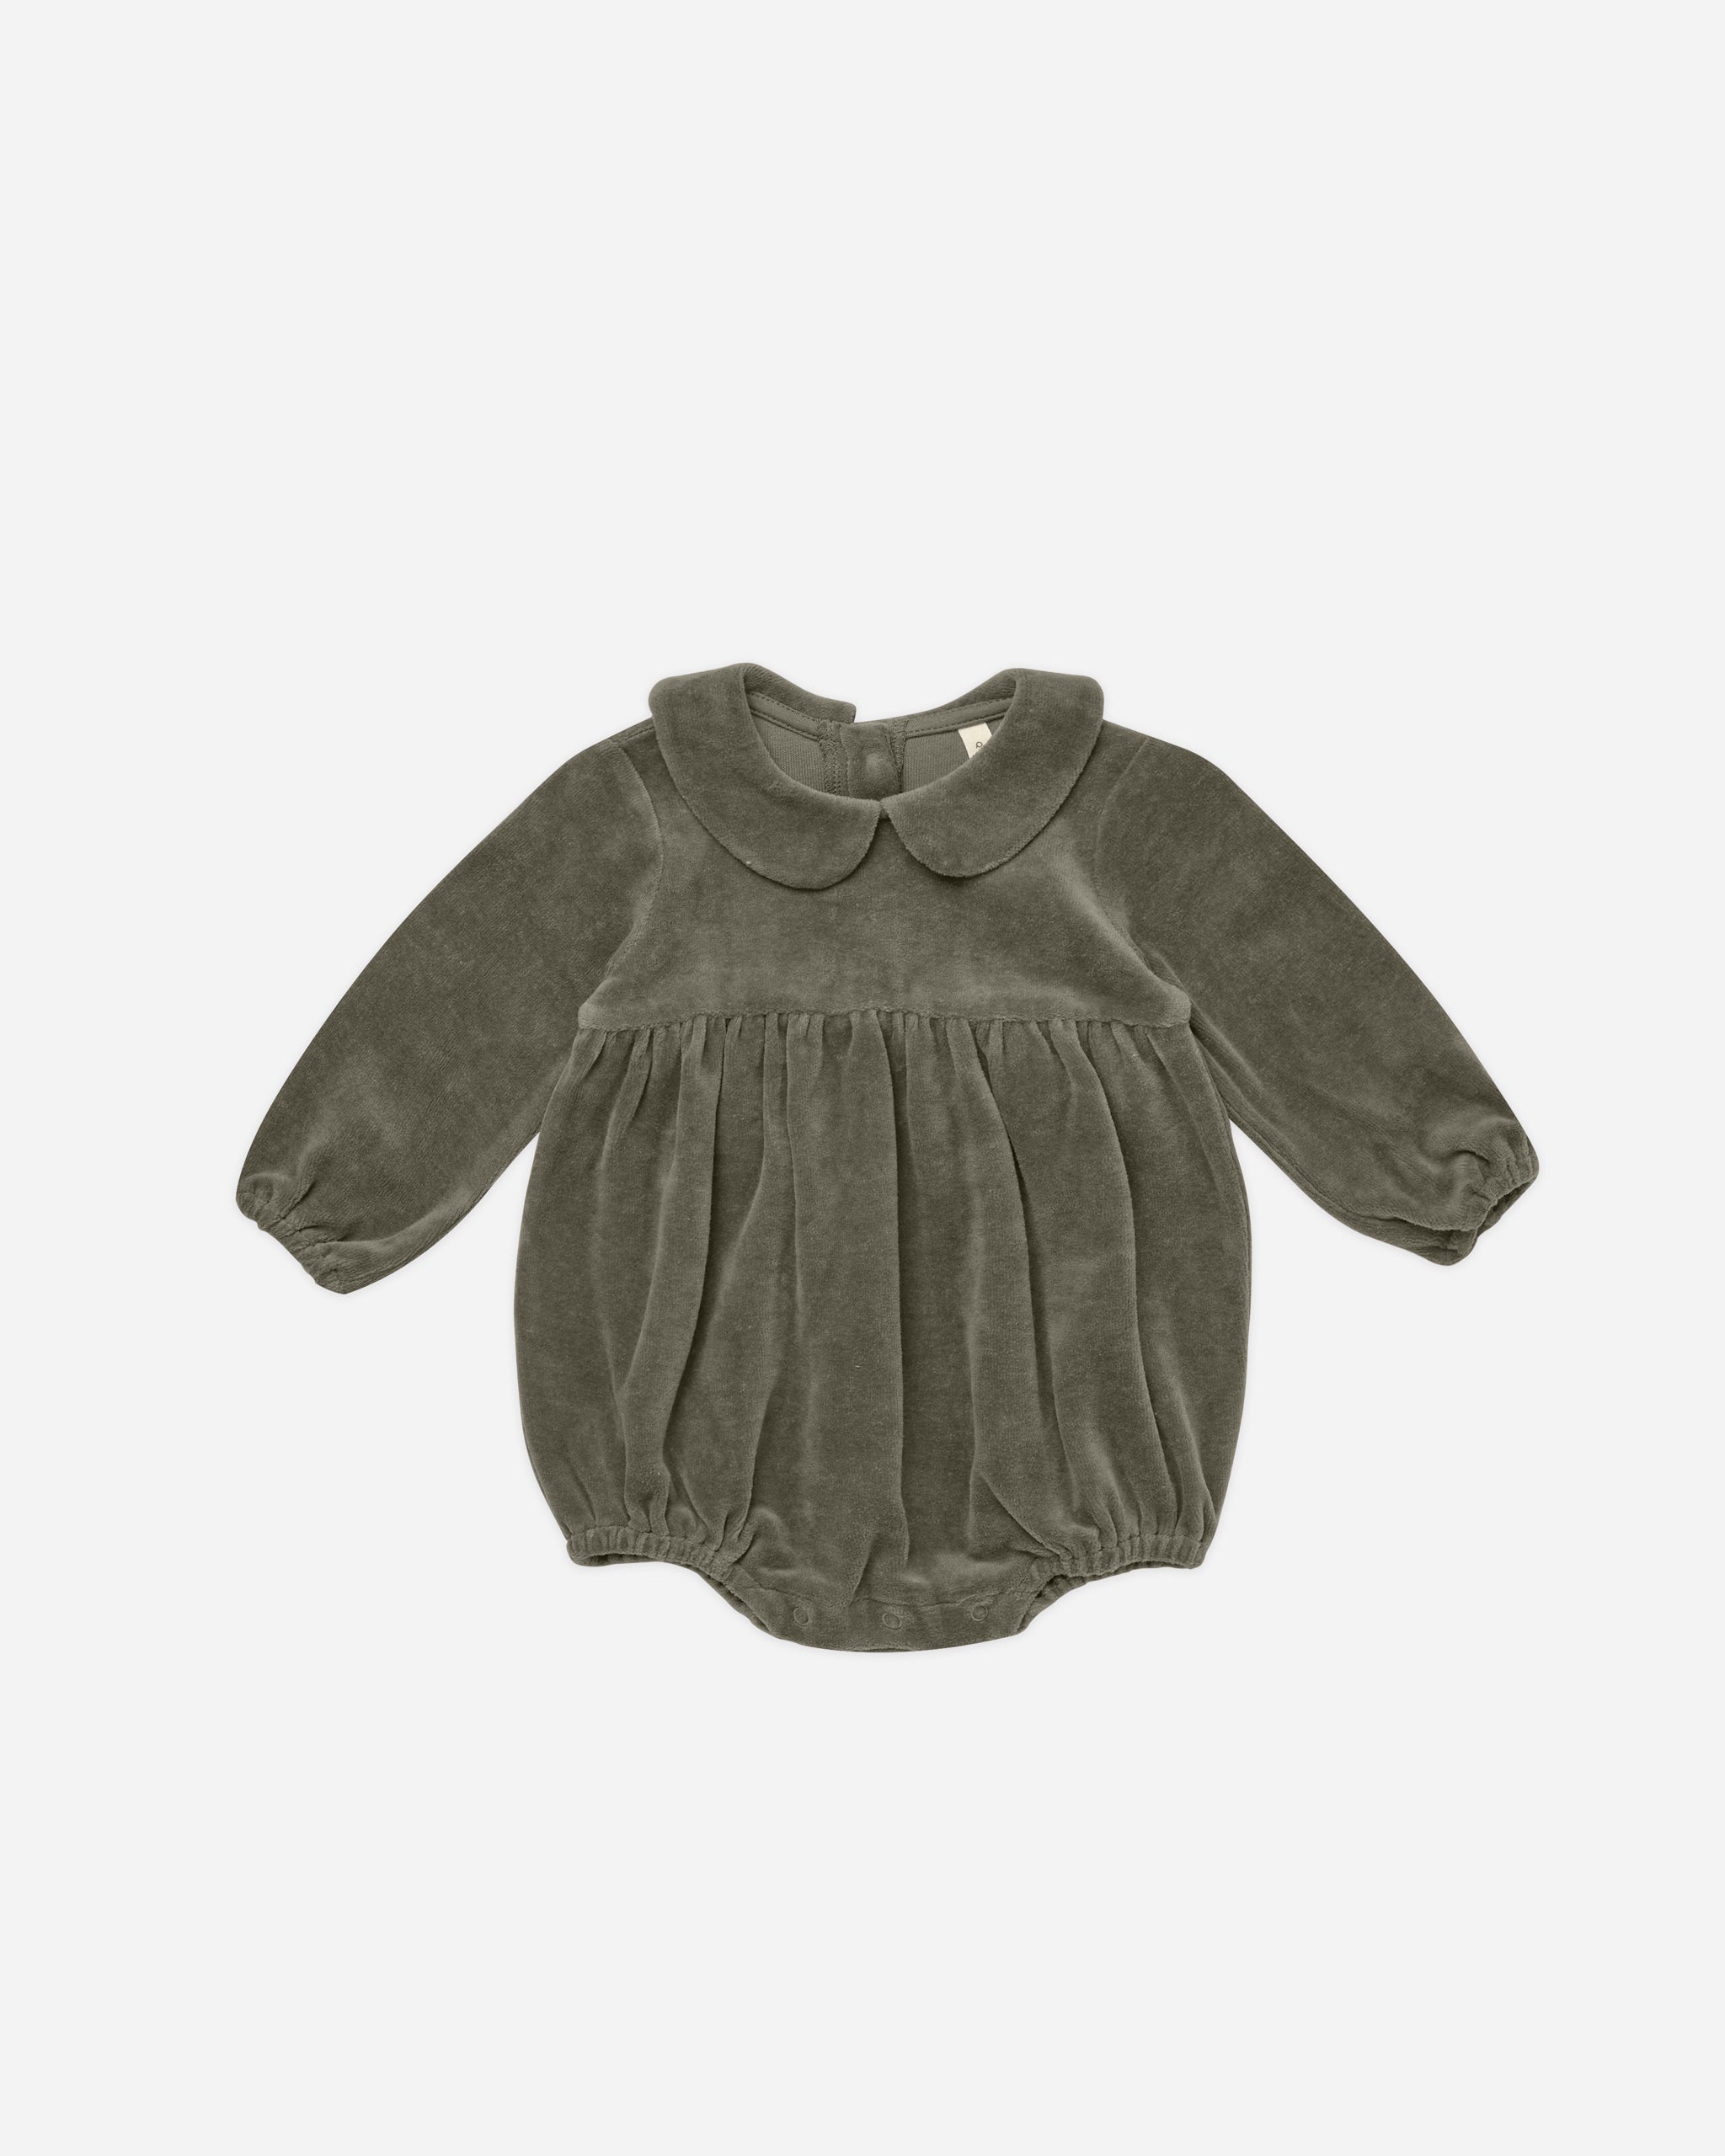 Peter Pan Romper || Forest - Rylee + Cru | Kids Clothes | Trendy Baby Clothes | Modern Infant Outfits |